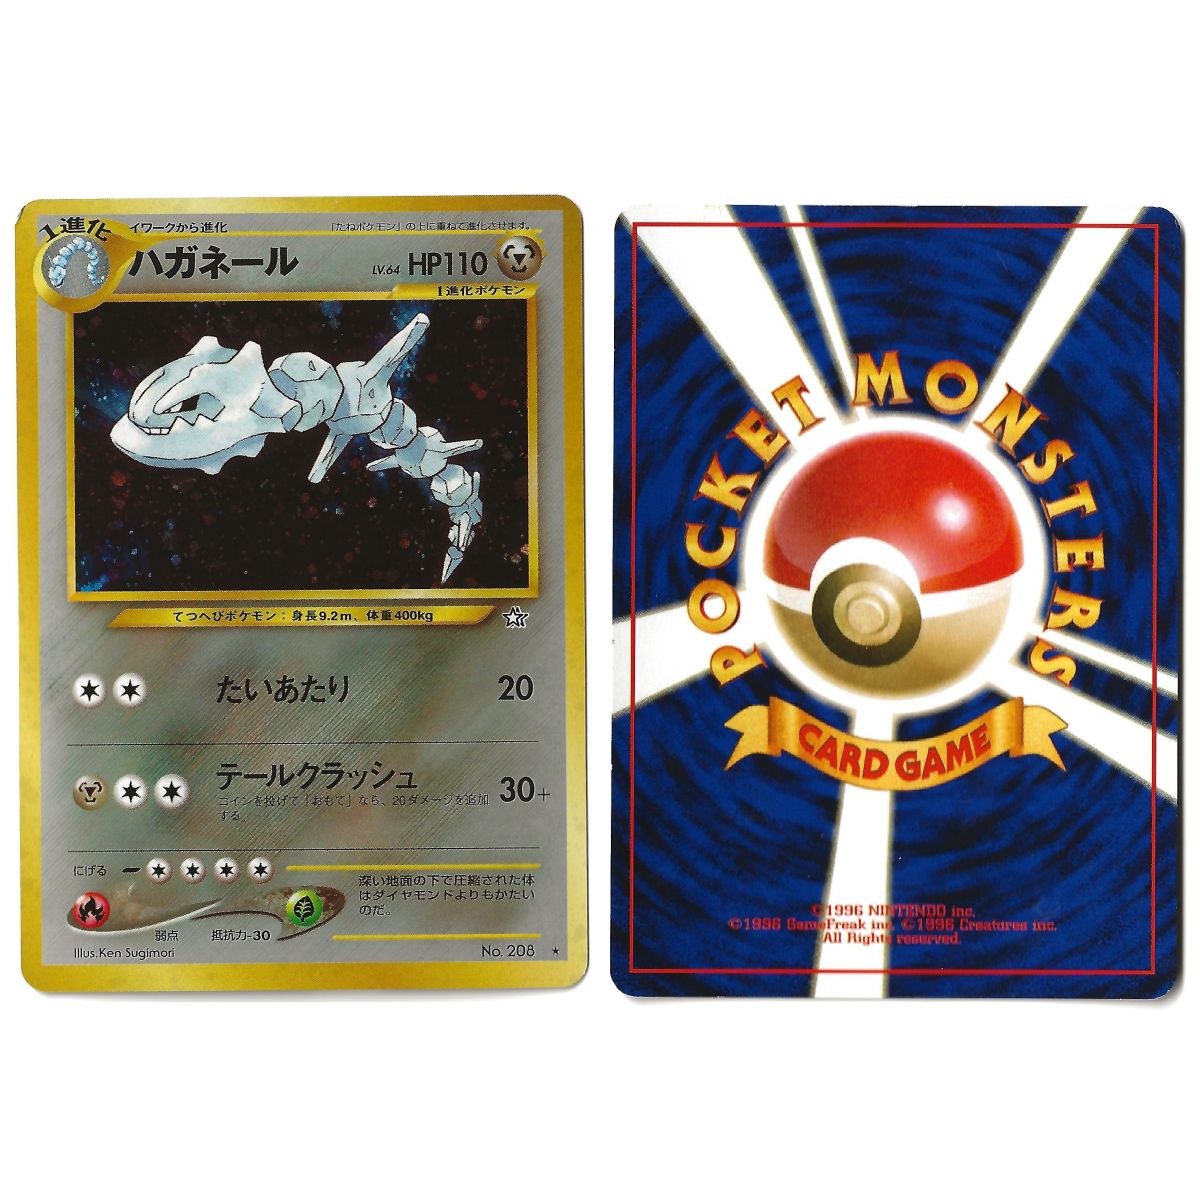 Steelix (1) No.208 Gold, Silver, to a New World... N1 Holo Unlimited Japonais Voir Scan